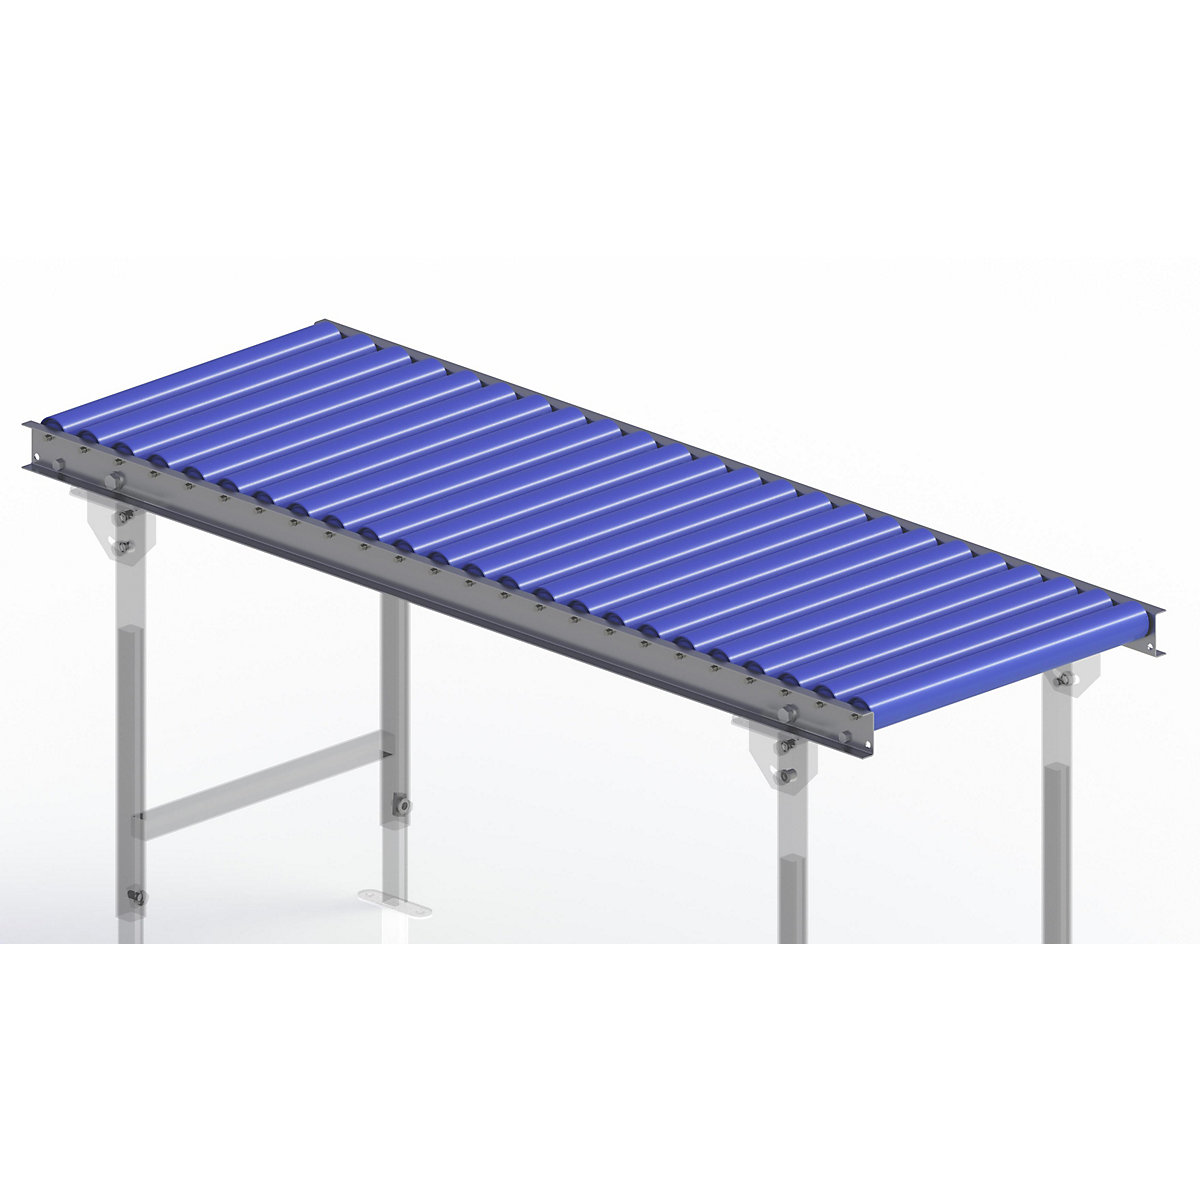 Gura – Light duty roller conveyor, steel frame with plastic rollers, track width 500 mm, axle spacing 62.5 mm, length 1.5 m